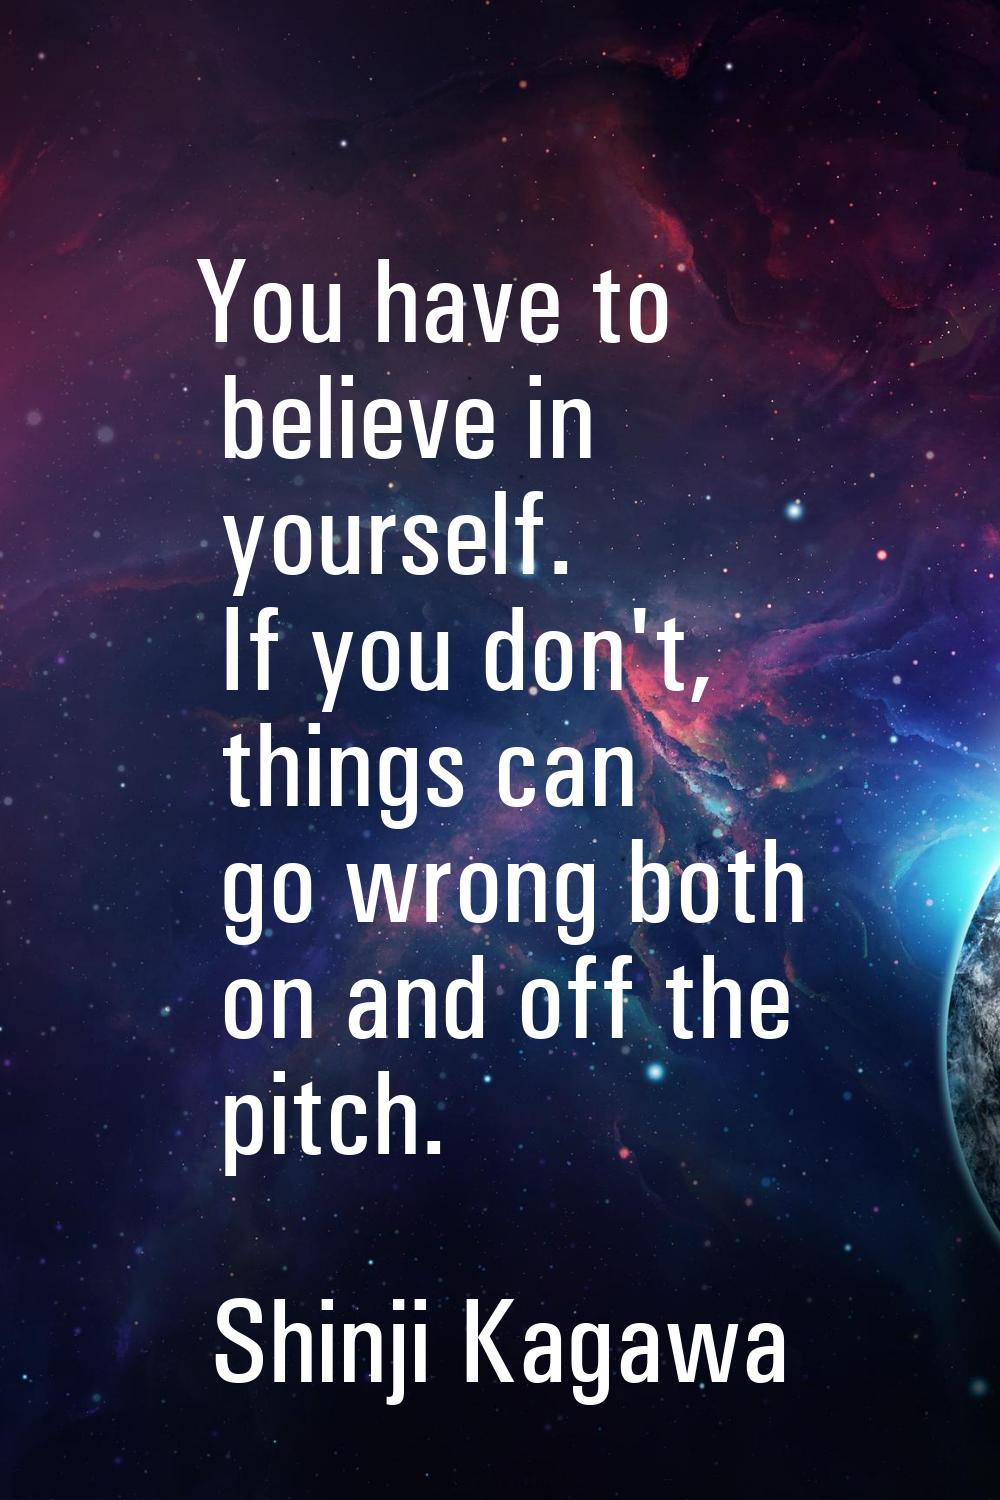 You have to believe in yourself. If you don't, things can go wrong both on and off the pitch.